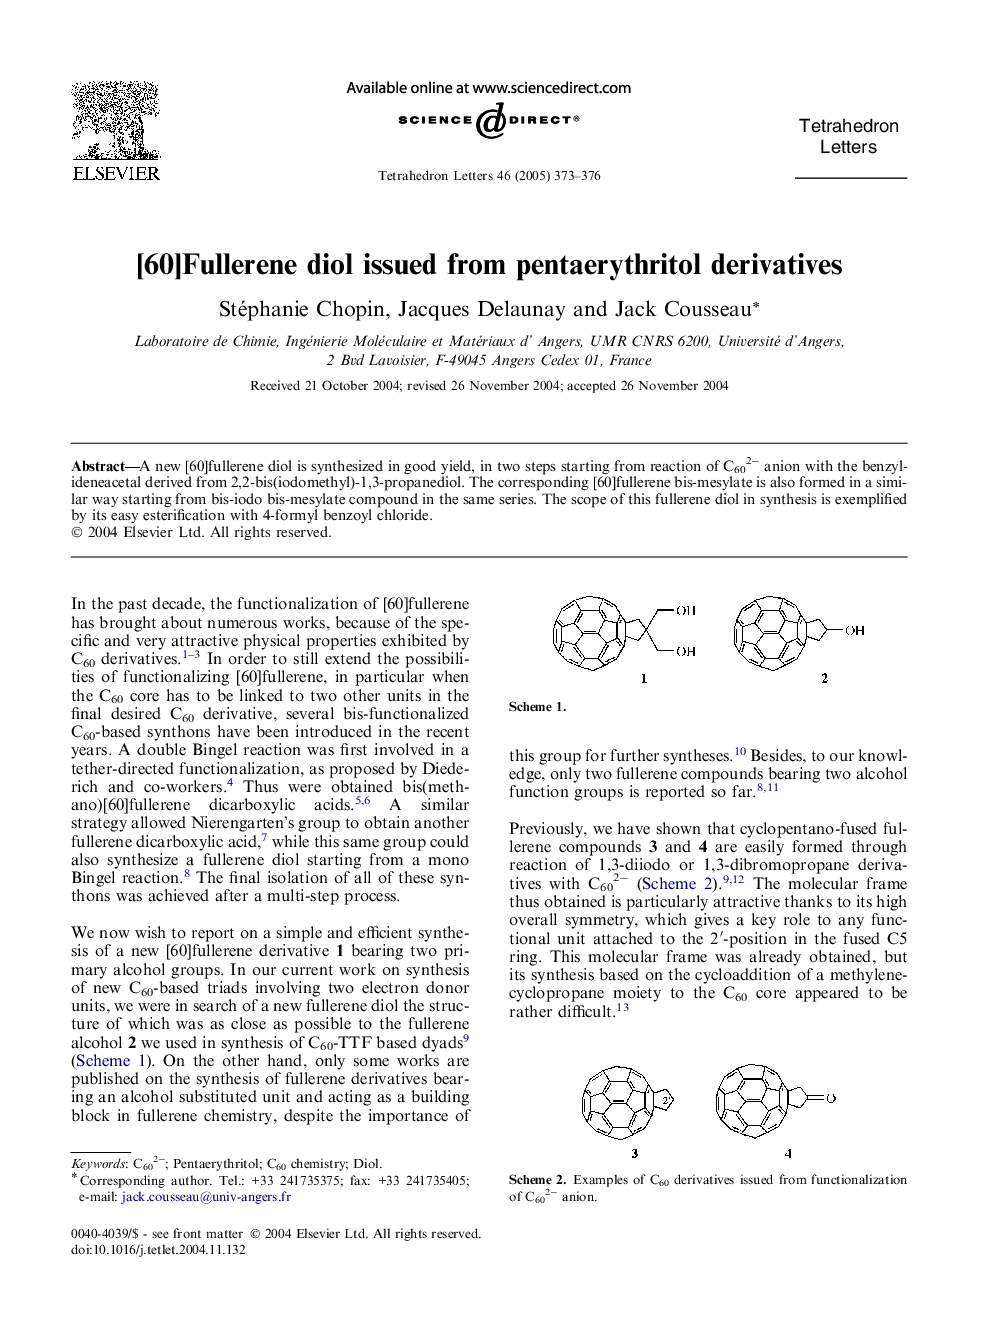 [60]Fullerene diol issued from pentaerythritol derivatives